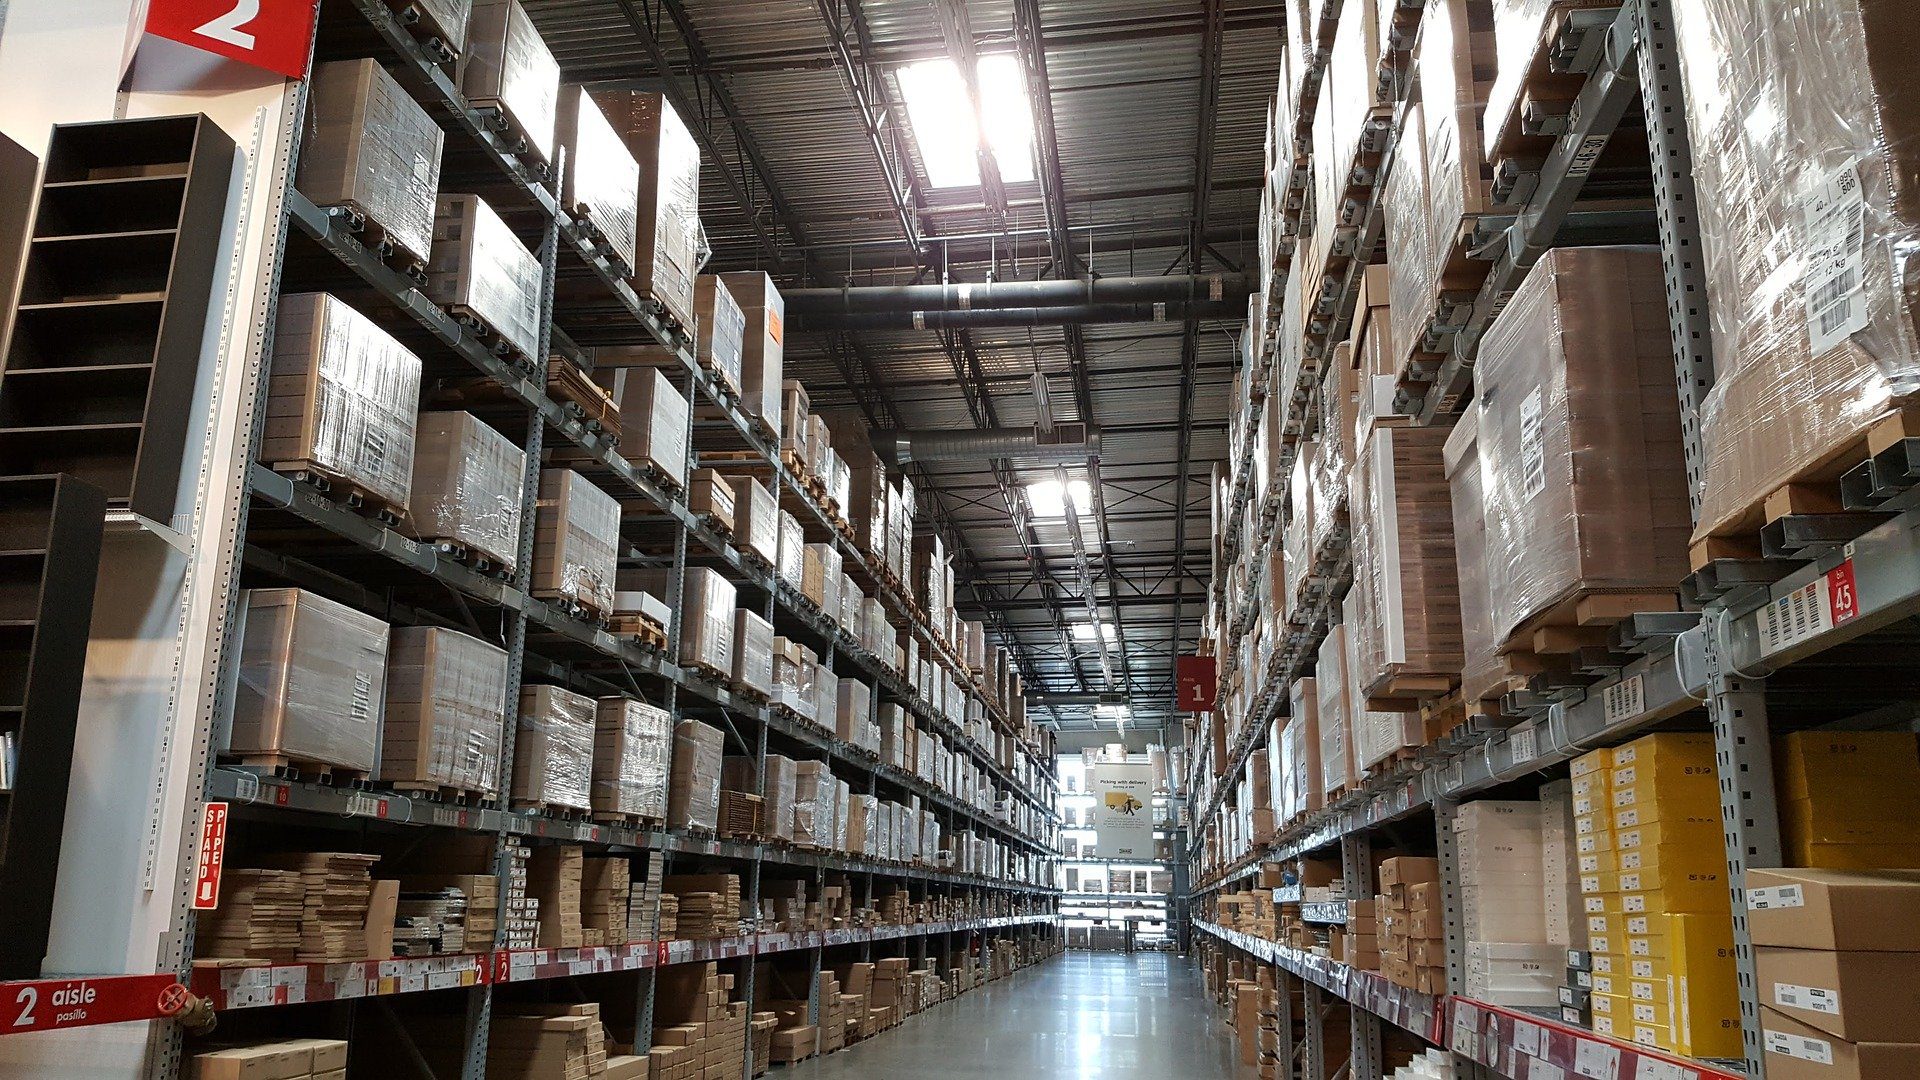 Rows of shelves in a warehouse loaded with boxes